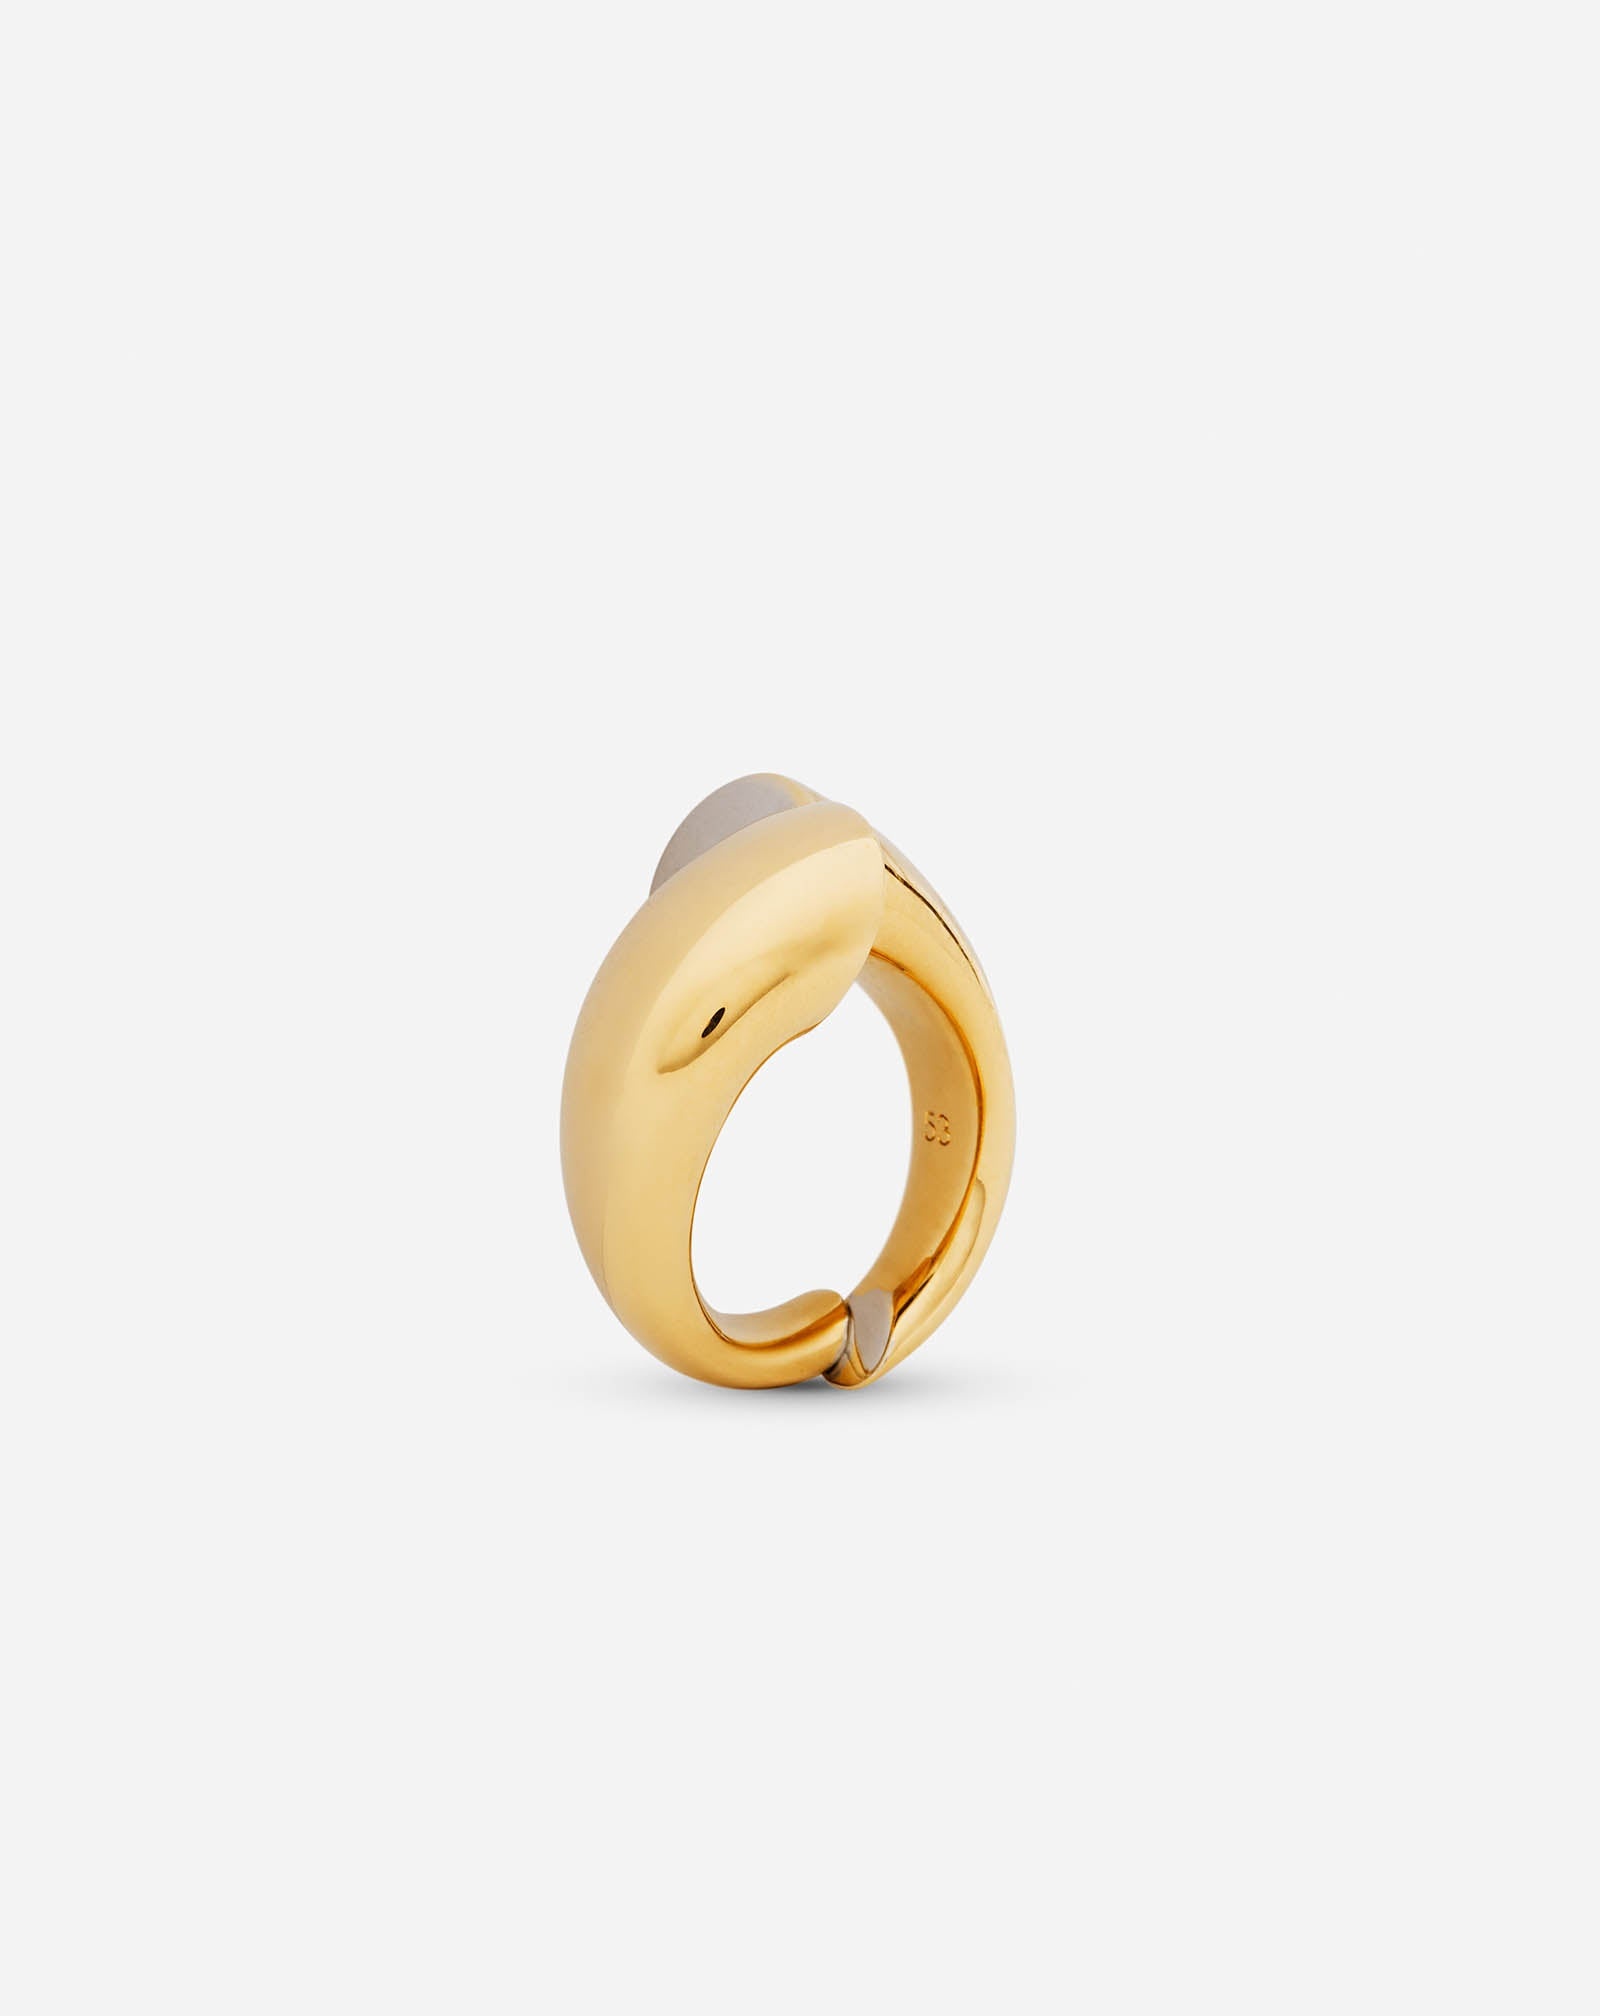 SEQUENCE BY LANVIN RING - 2